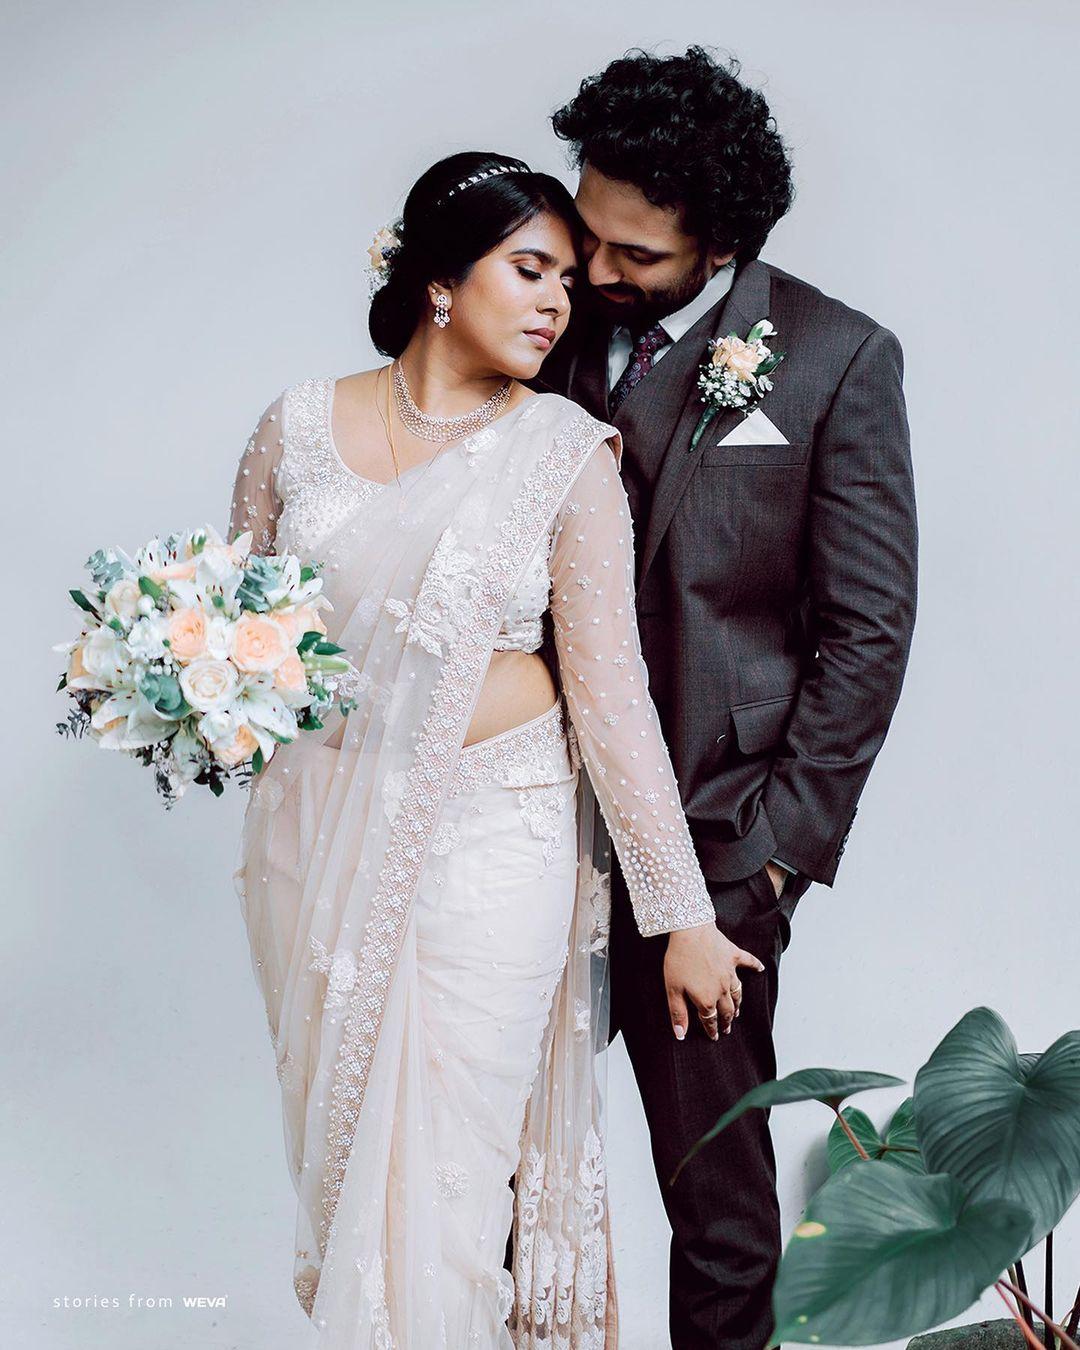 The Beauty of a Kerala Christian Wedding Decoded For You